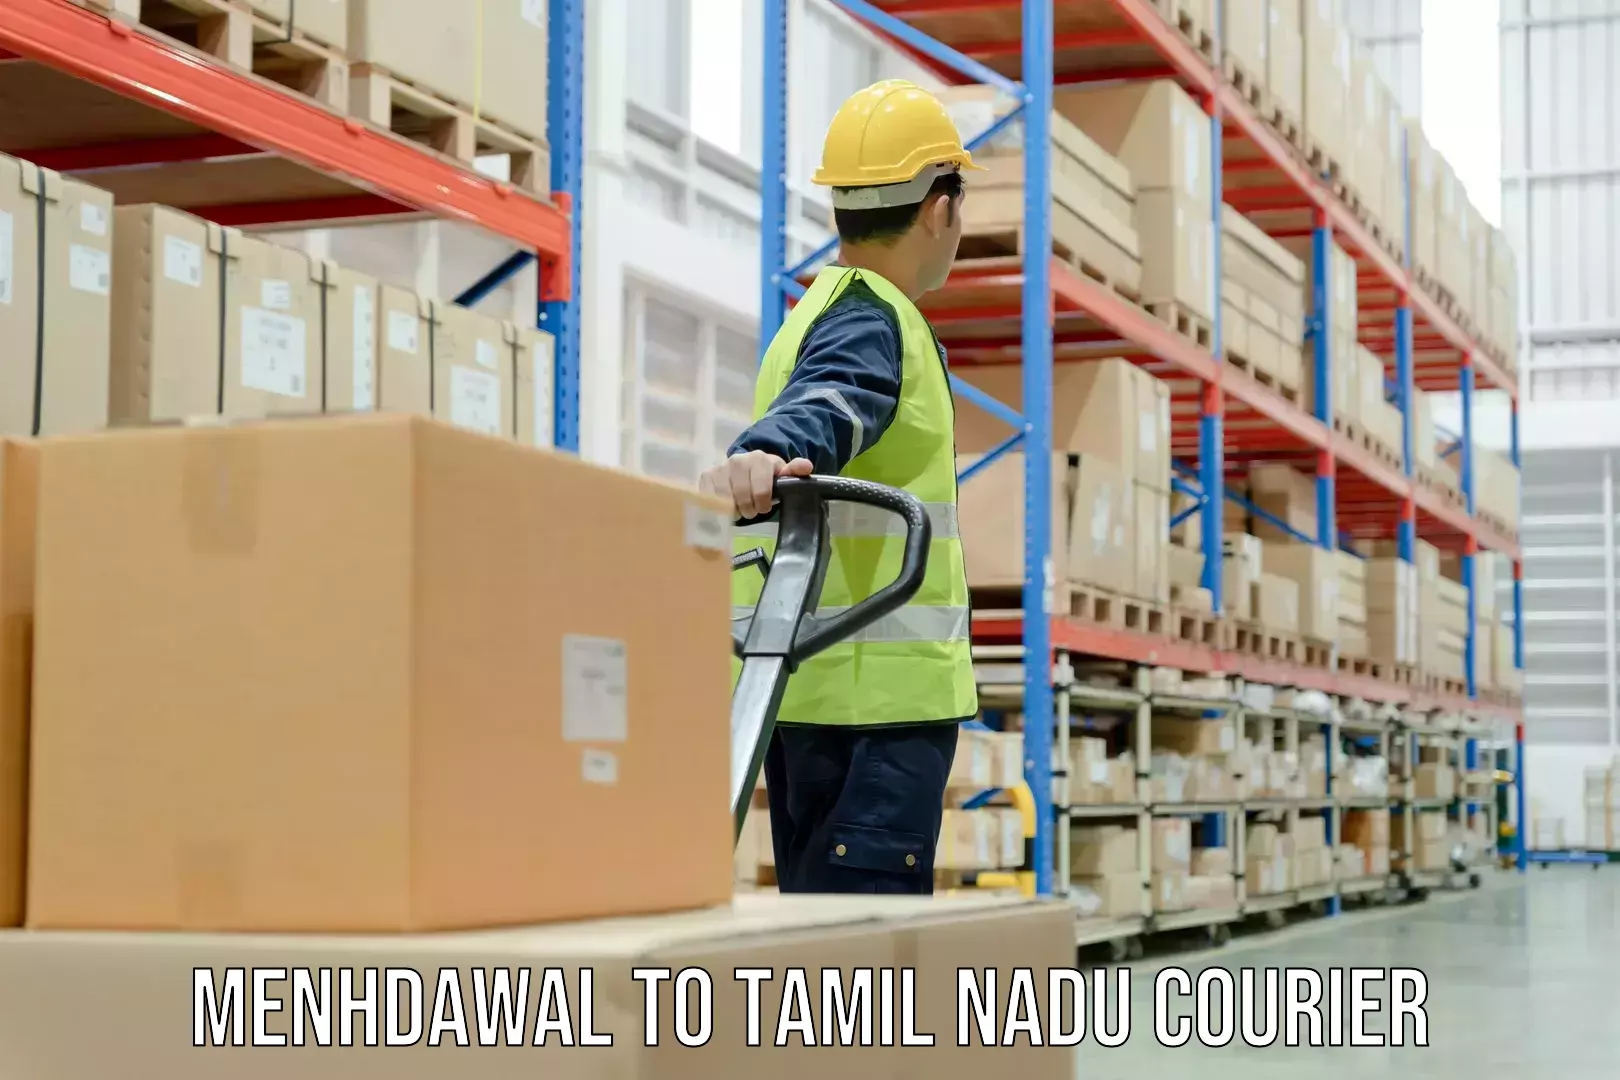 24/7 courier service Menhdawal to Gummidipoondi